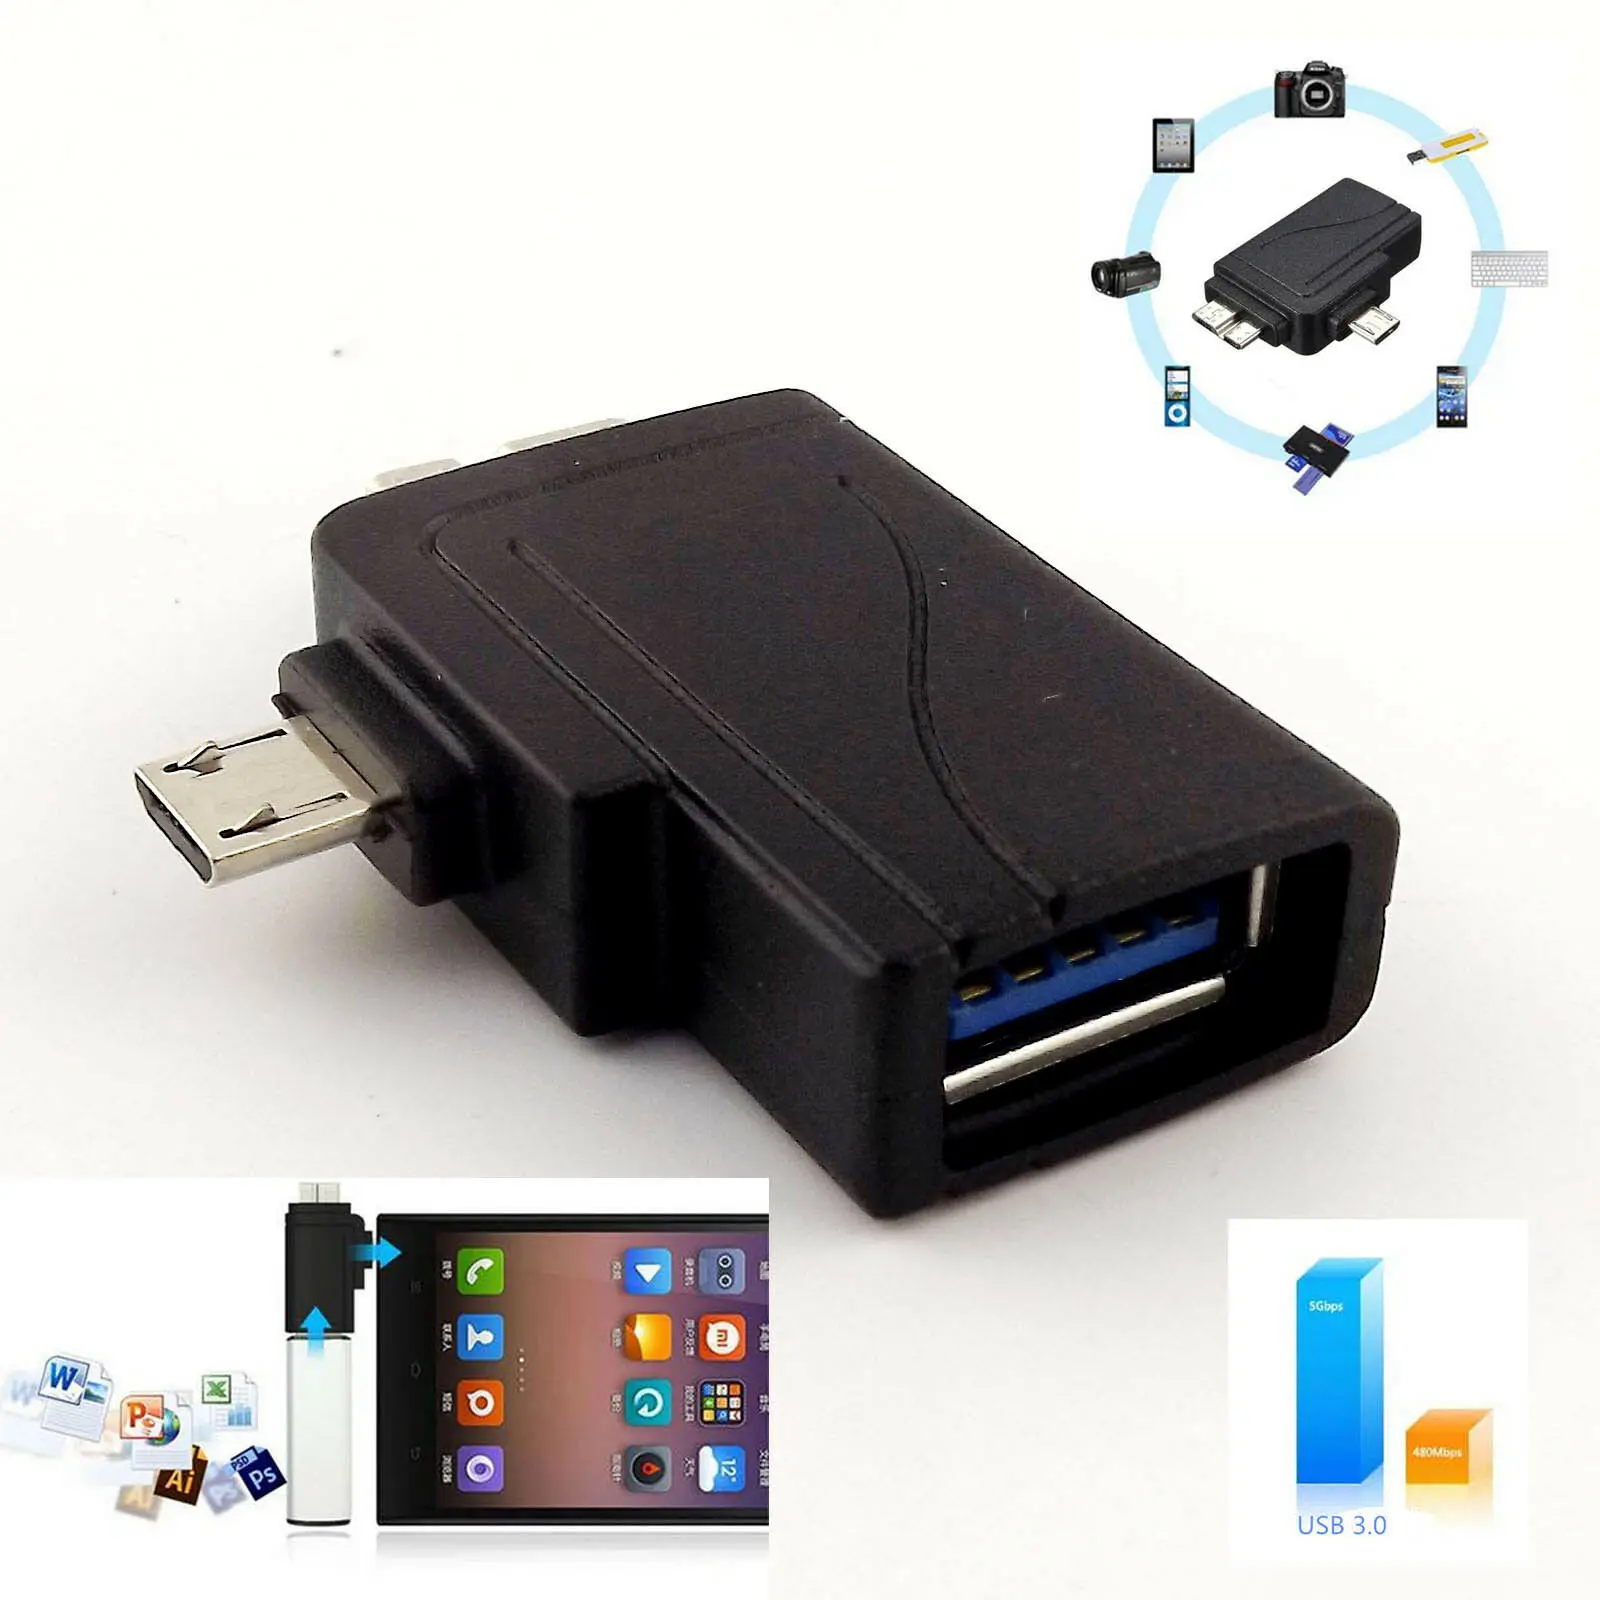 

1pcs Micro USB 3.0 2.0 Male 2 In 1 To USB 3.0 Charger OTG Host Adapter For Samsung S5